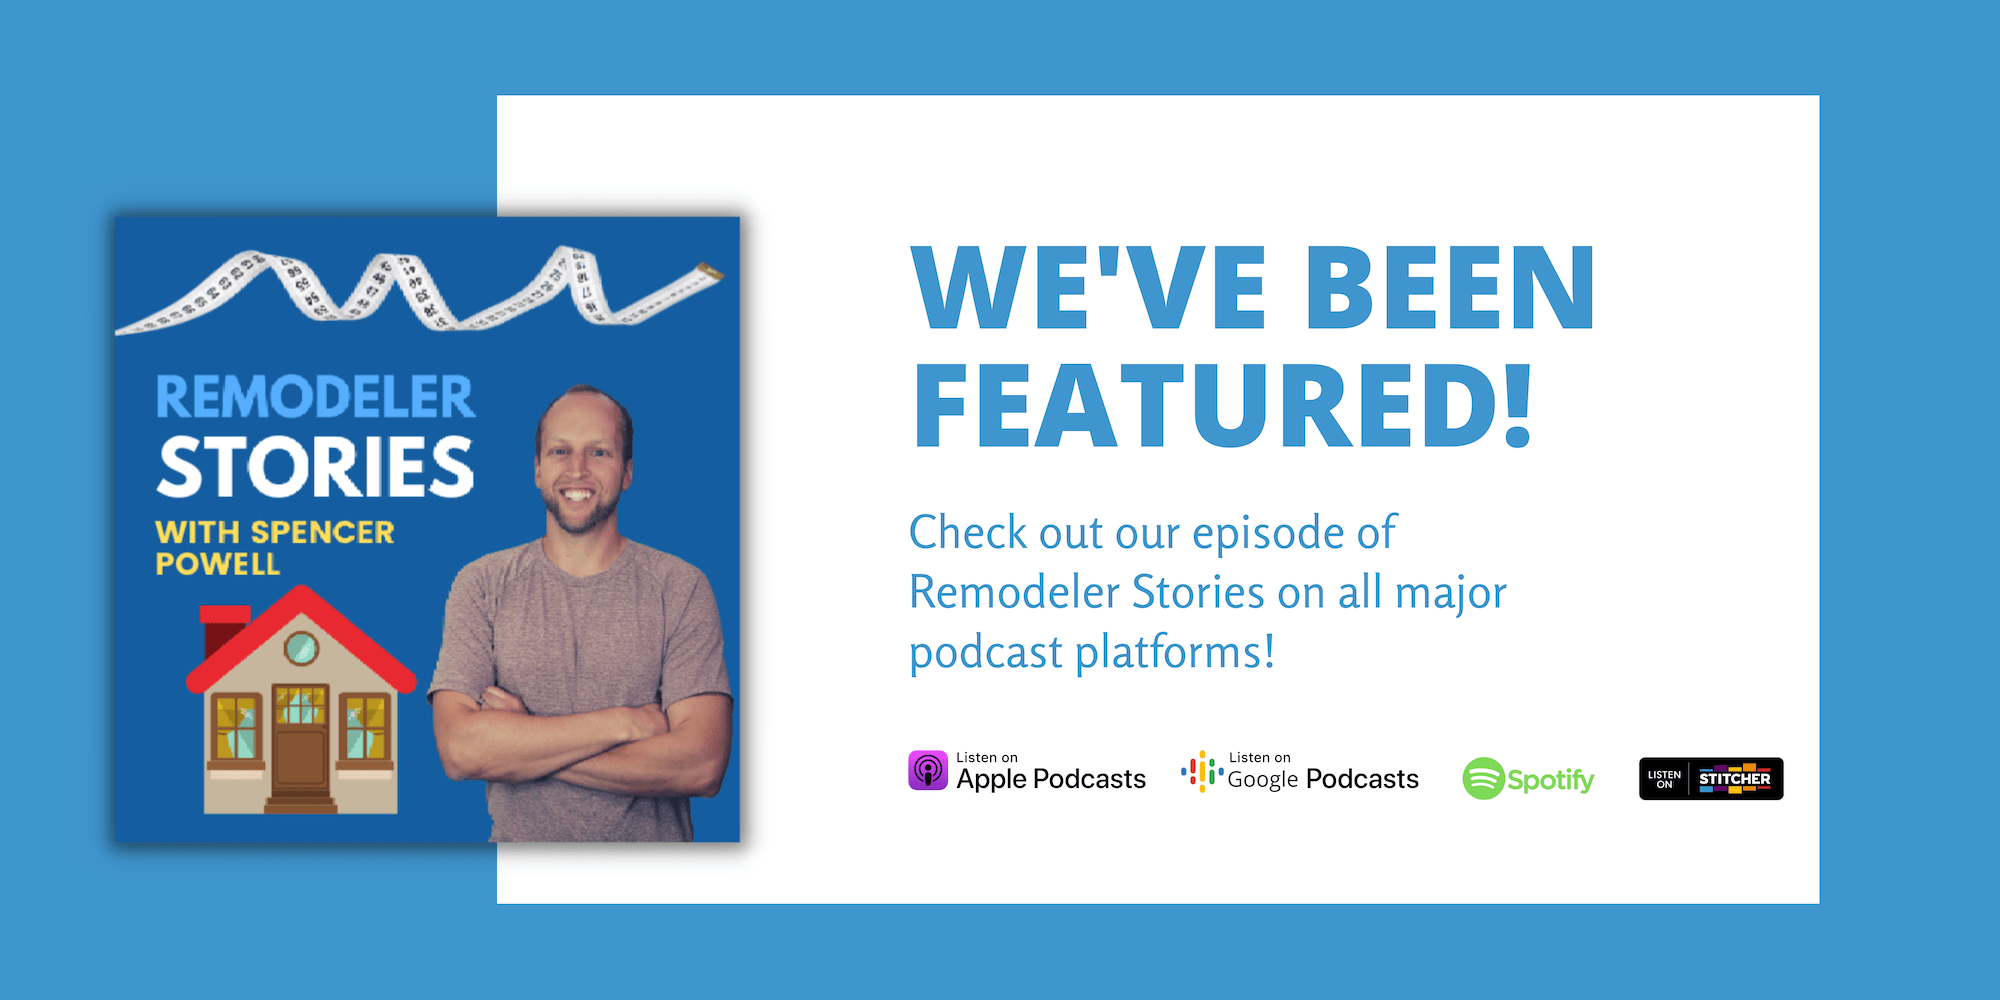 We’ve been featured on Remodeler Stories, a top podcast where real remodeling business owners share their company stories.